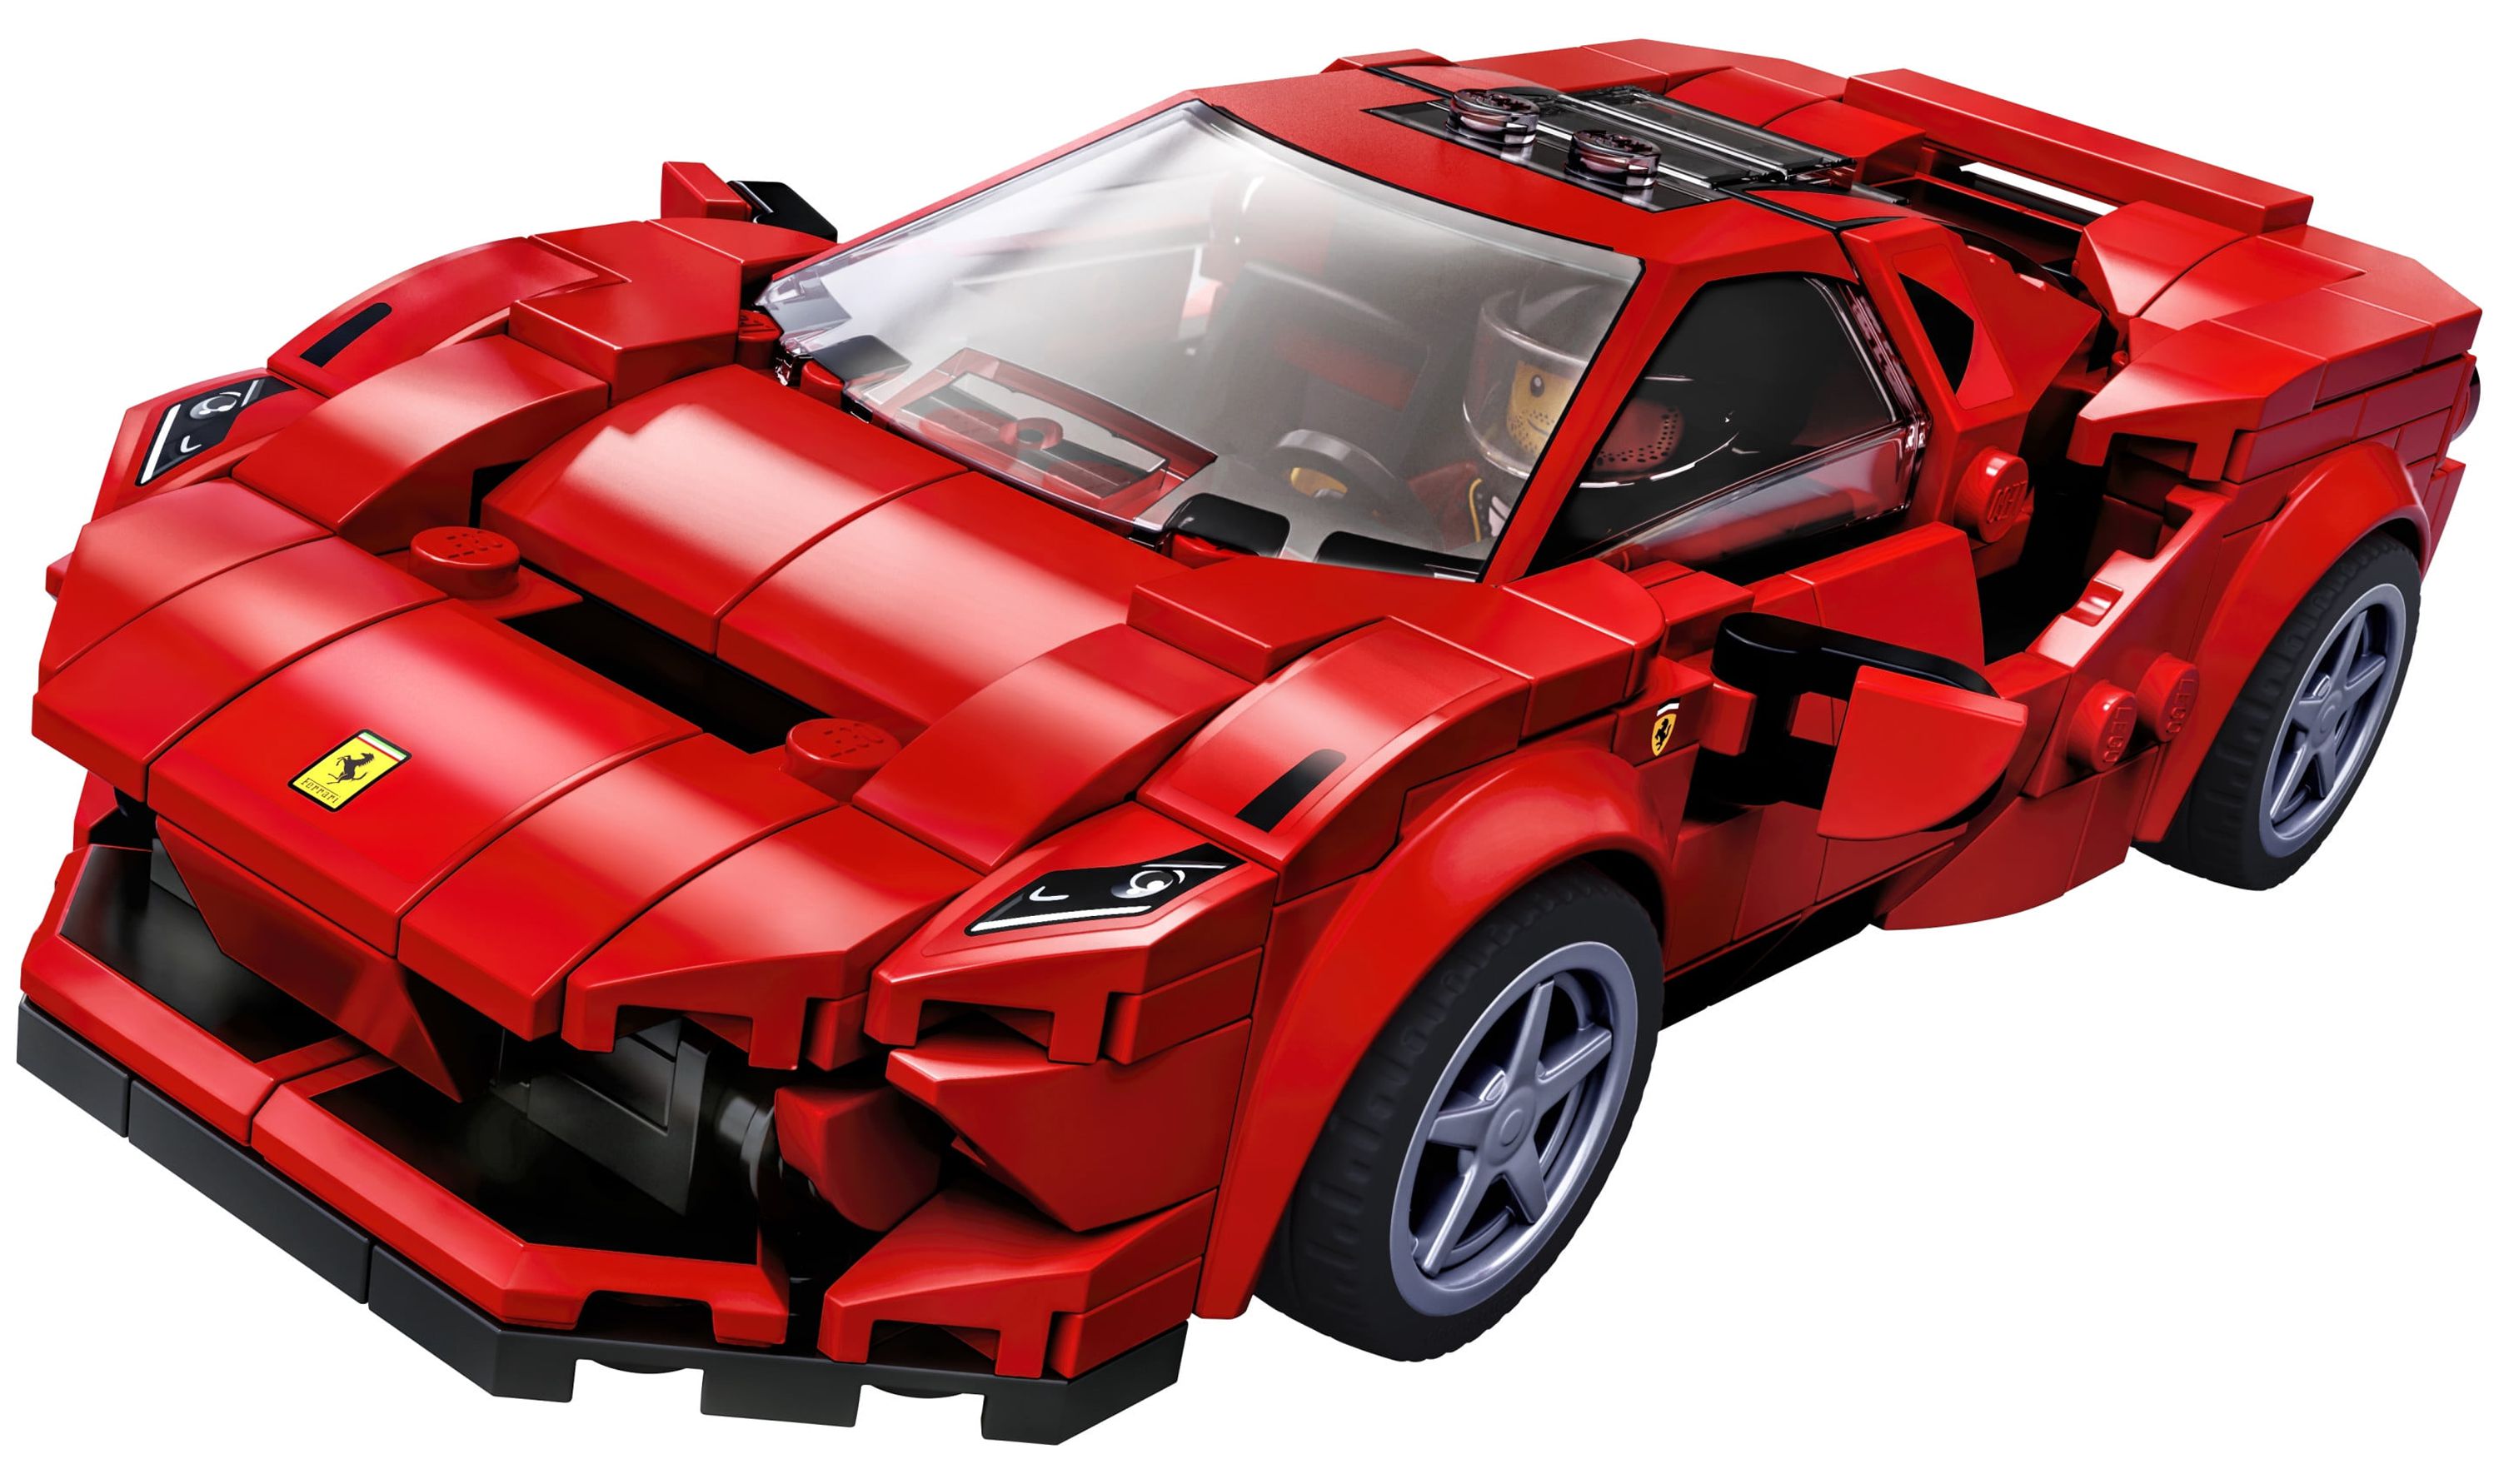 LEGO Speed Champions 76895 Ferrari F8 Tributo Racing Model Car, Vehicle Building Car (275 pieces) - image 3 of 12